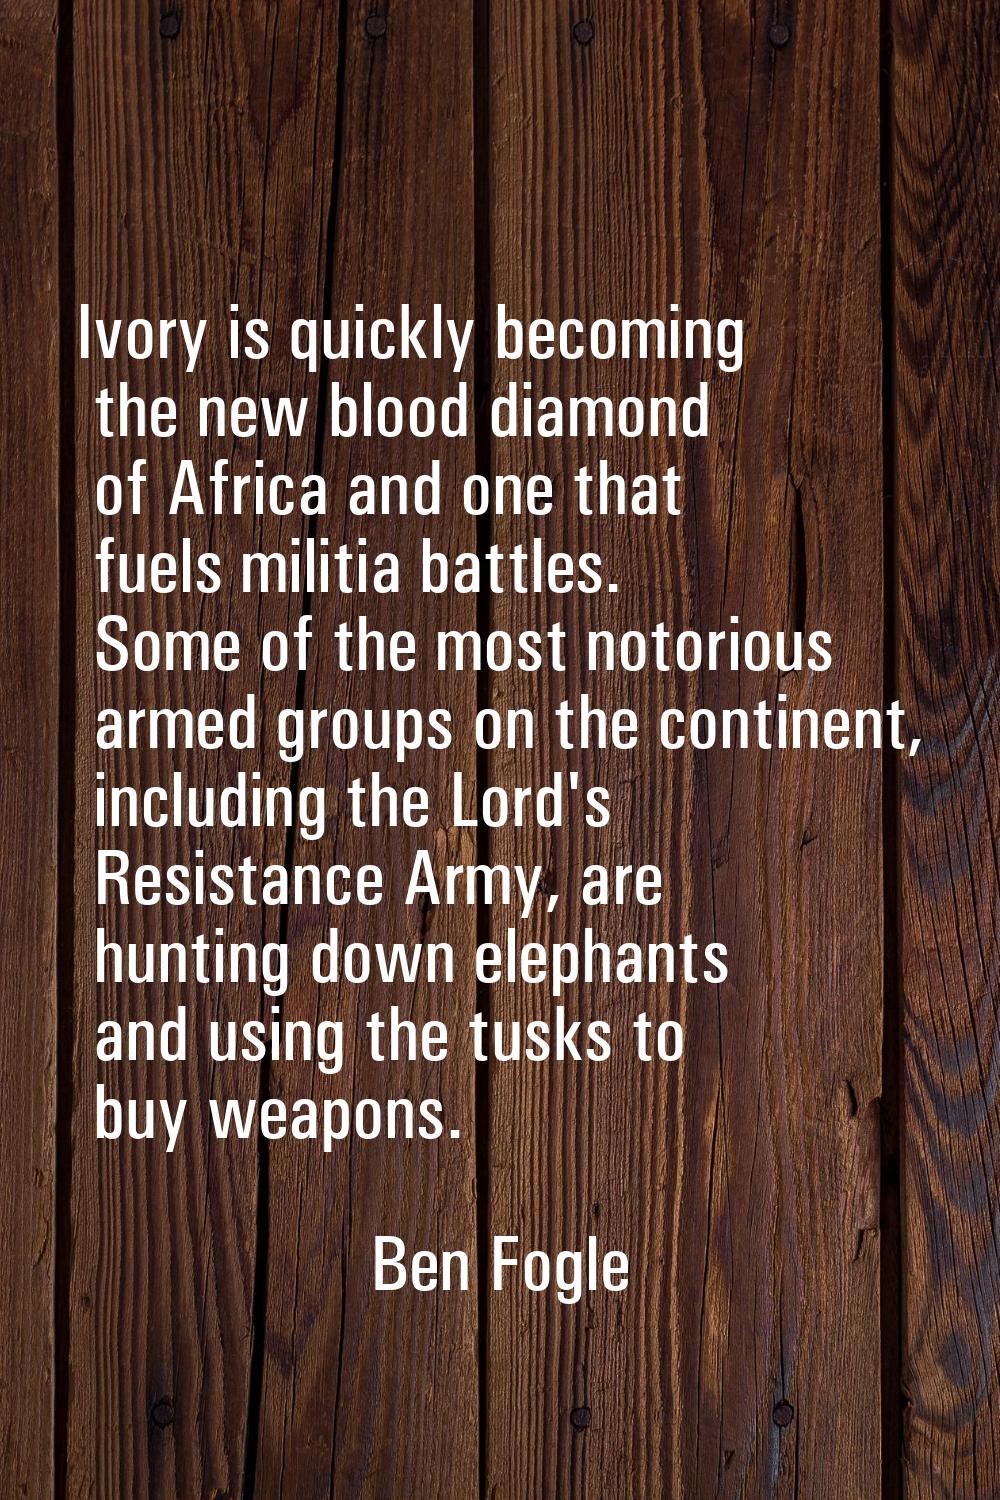 Ivory is quickly becoming the new blood diamond of Africa and one that fuels militia battles. Some 